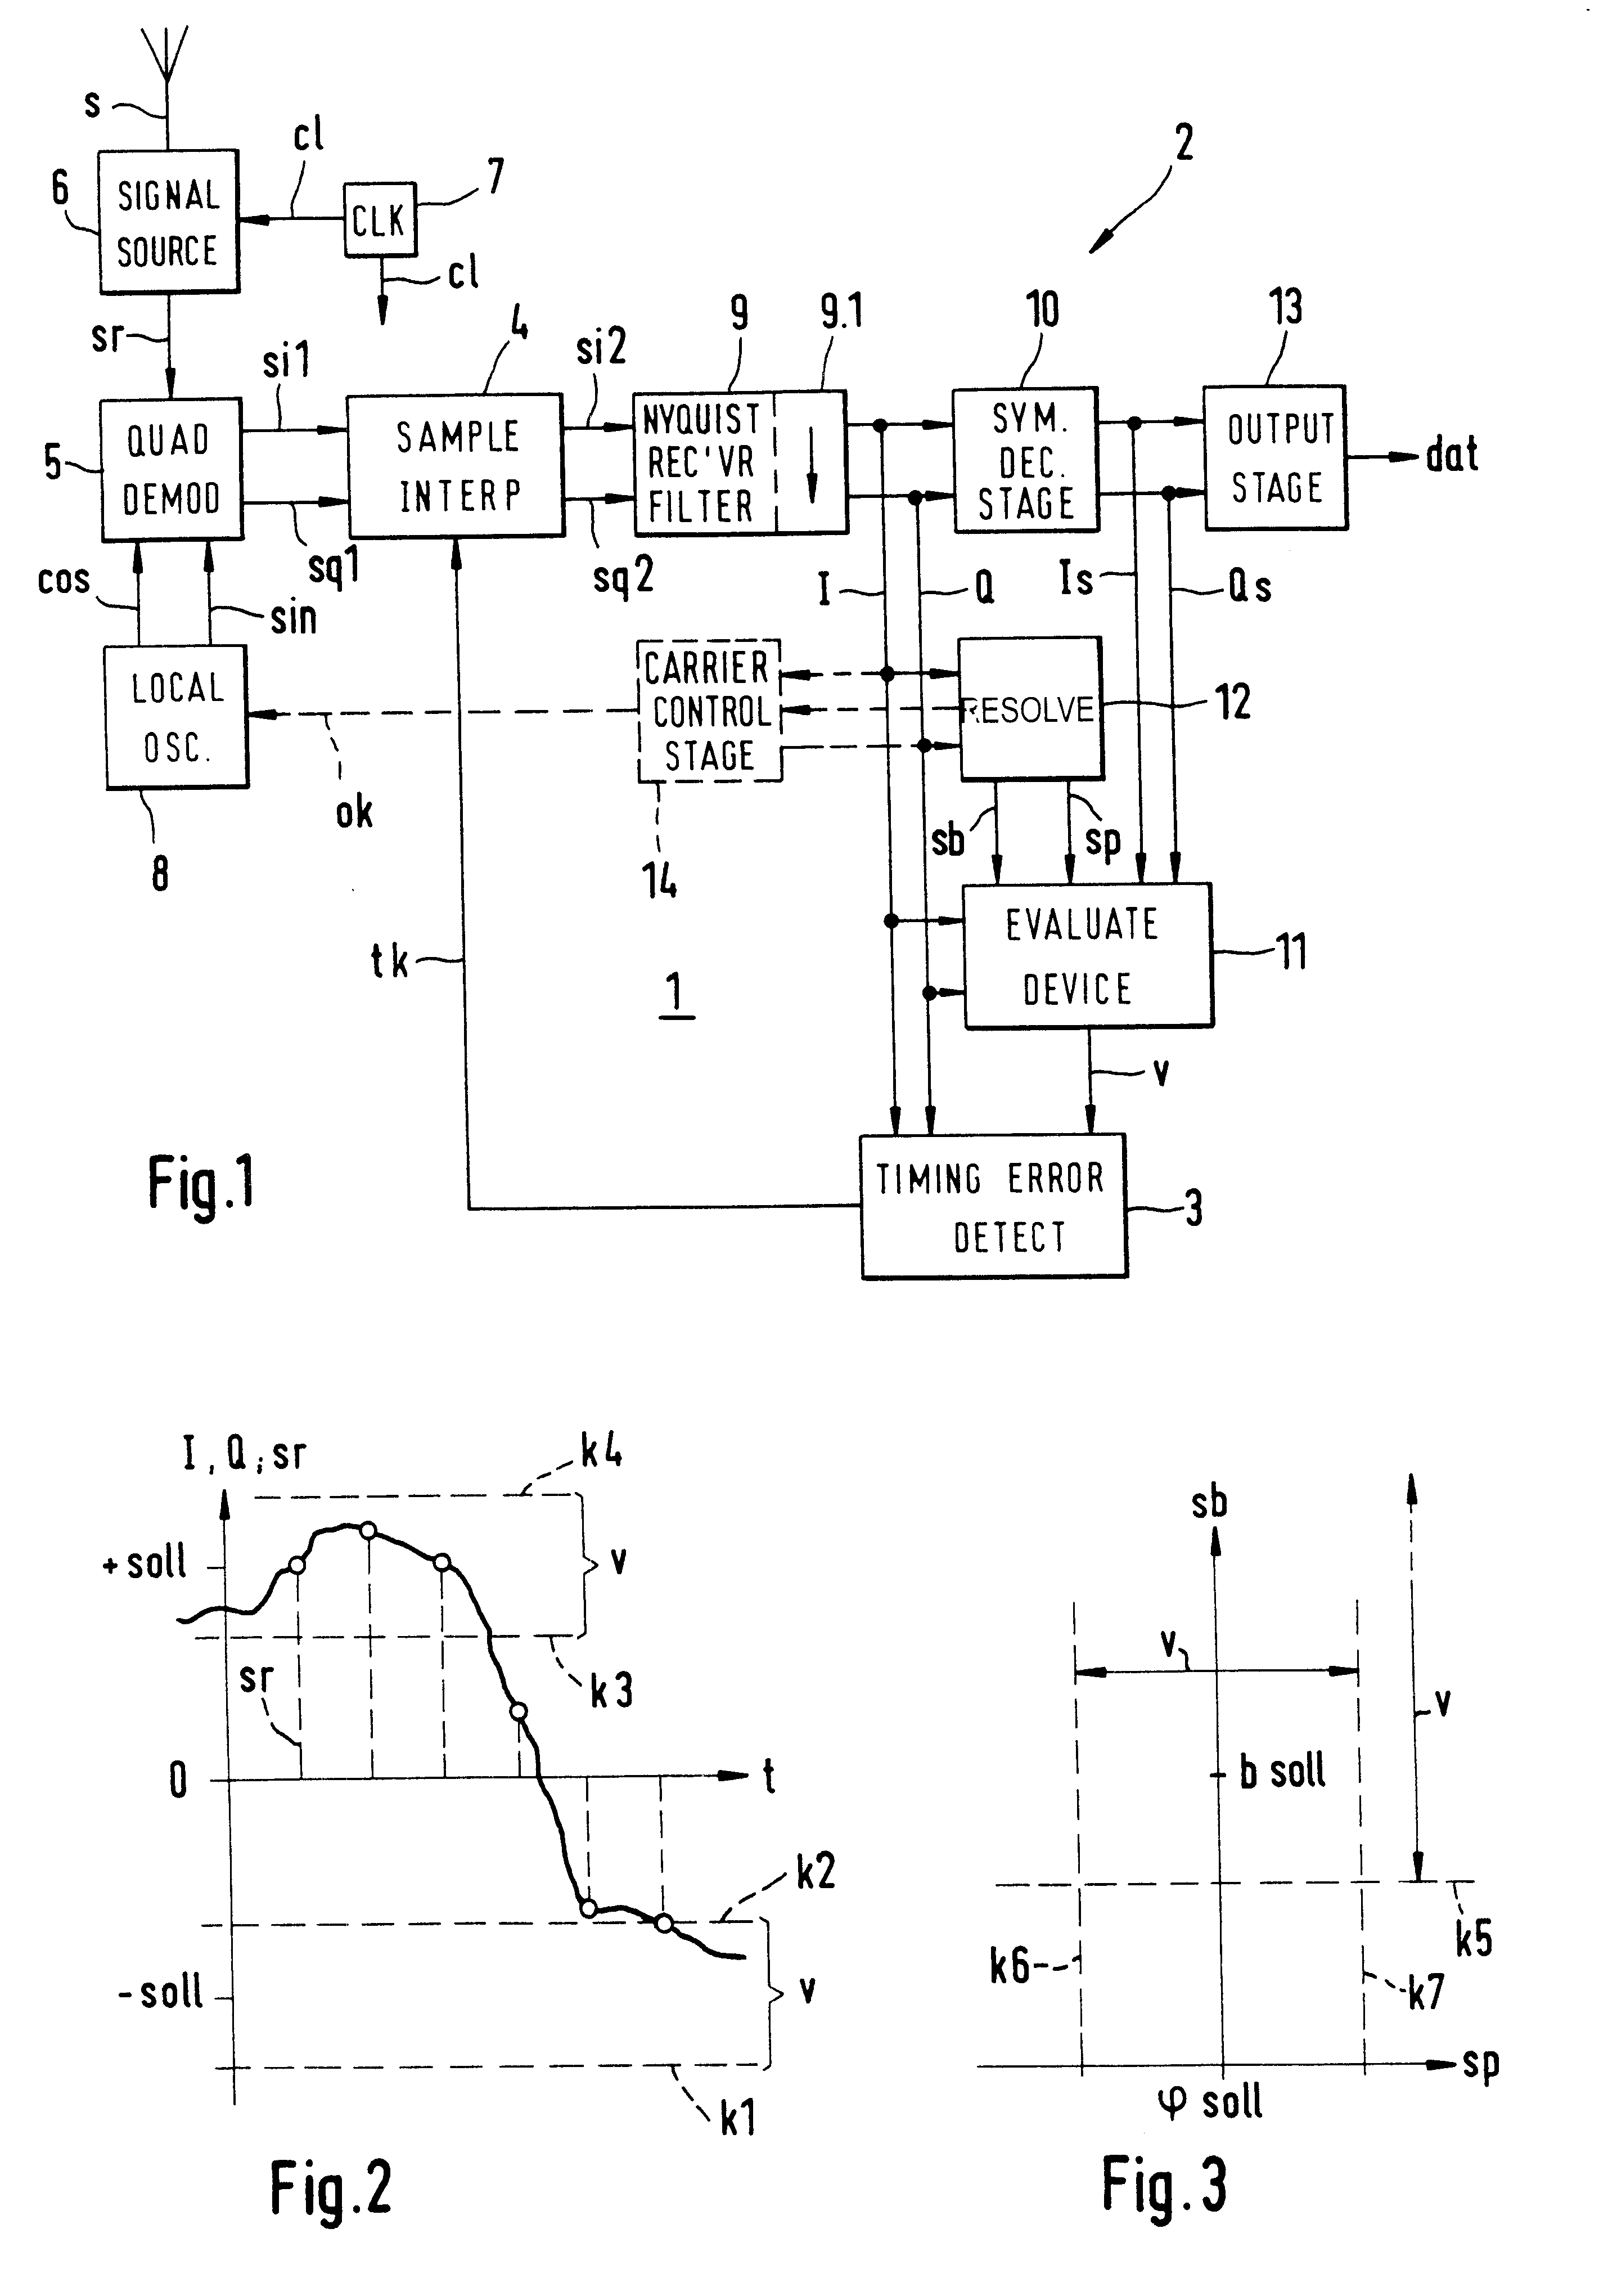 Sampling control loop for a receiver for digitally transmitted signals